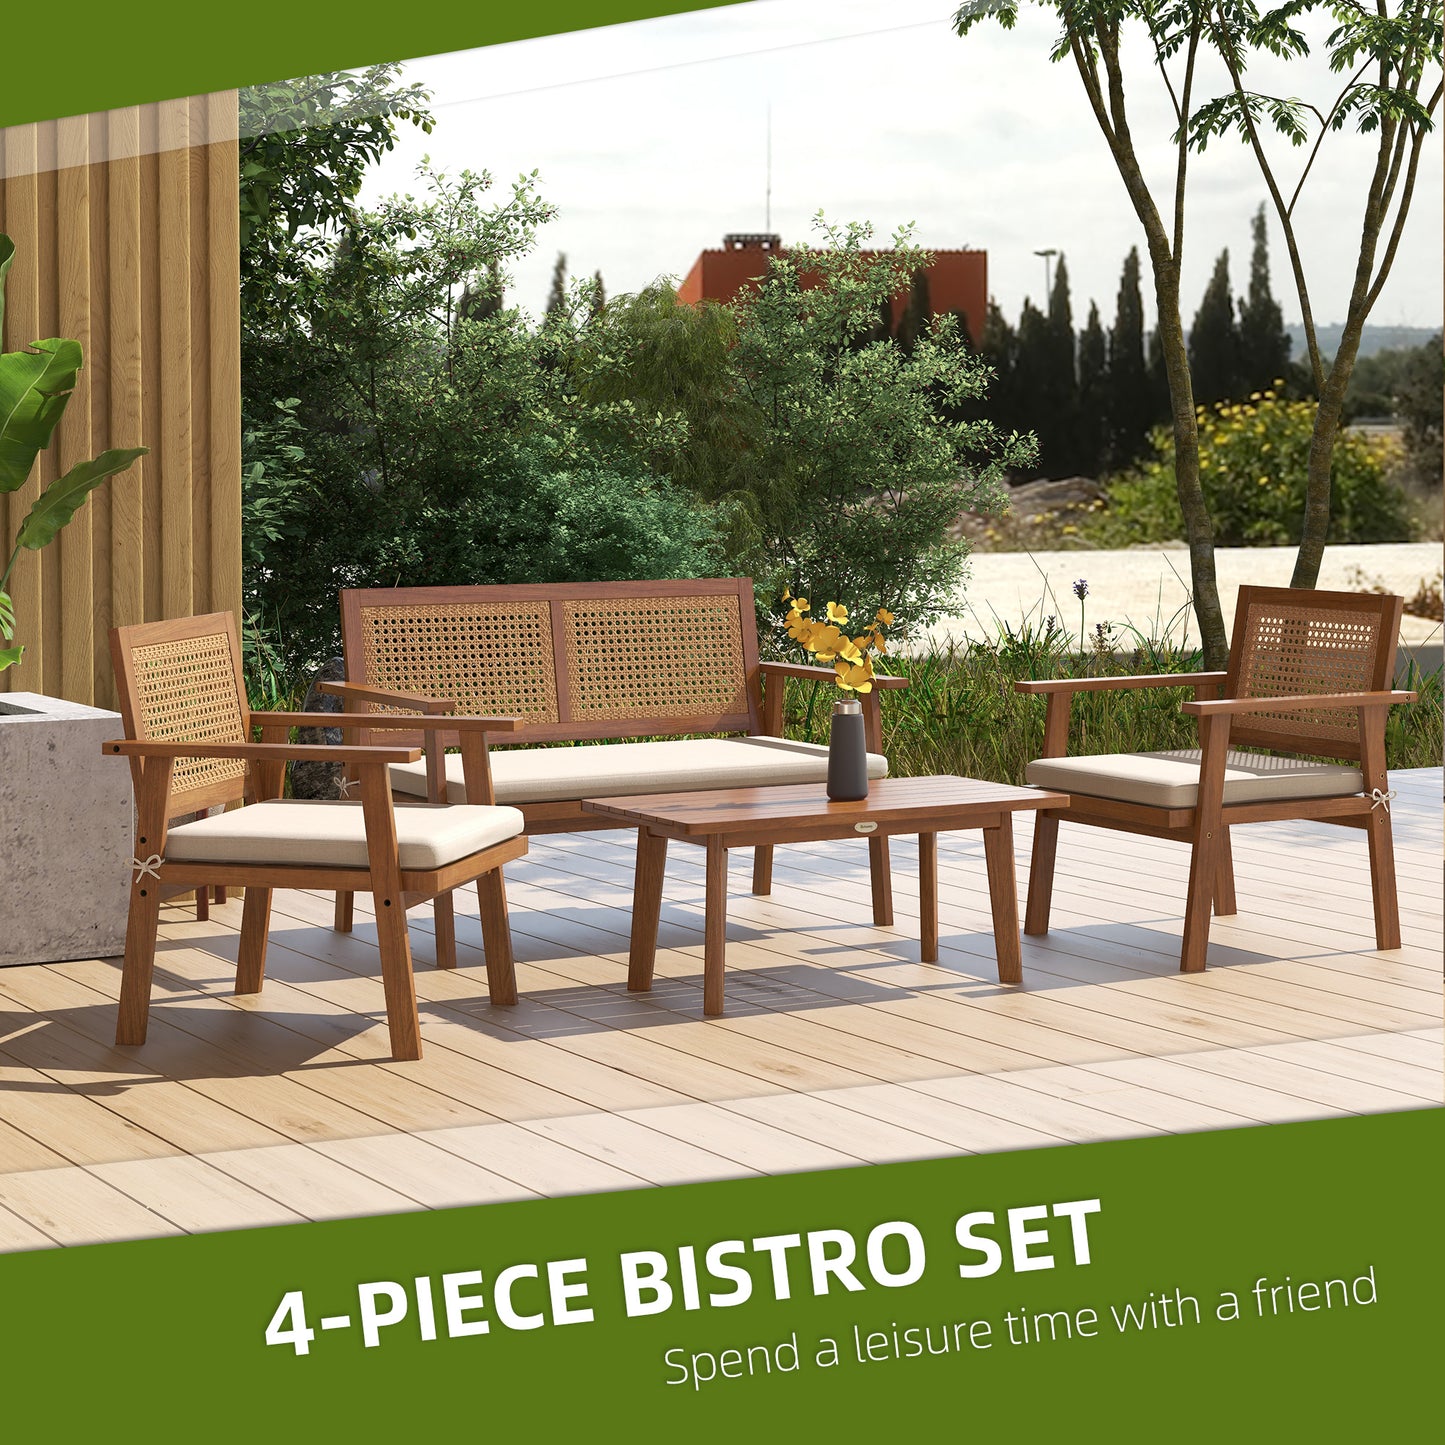 Outsunny 4 Pcs Patio Furniture Set Wicker Furniture Set w/ Seat Cushions with Loveseat Sofa, Seat Cushions for Garden, Backyard